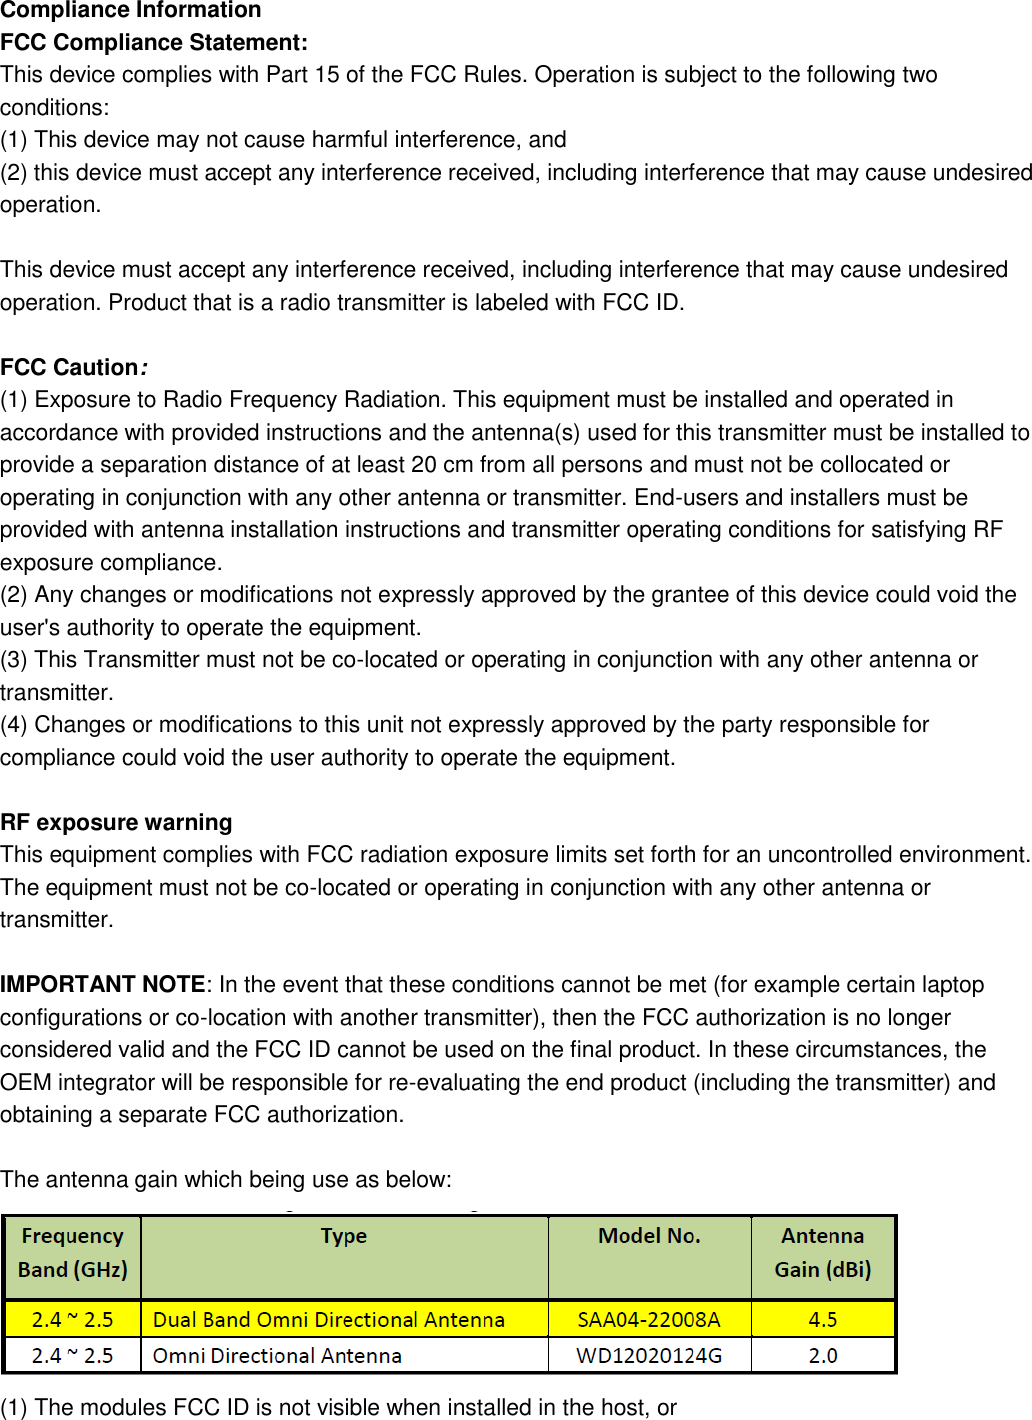 Compliance Information FCC Compliance Statement: This device complies with Part 15 of the FCC Rules. Operation is subject to the following two conditions: (1) This device may not cause harmful interference, and   (2) this device must accept any interference received, including interference that may cause undesired operation.    This device must accept any interference received, including interference that may cause undesired operation. Product that is a radio transmitter is labeled with FCC ID.  FCC Caution: (1) Exposure to Radio Frequency Radiation. This equipment must be installed and operated in accordance with provided instructions and the antenna(s) used for this transmitter must be installed to provide a separation distance of at least 20 cm from all persons and must not be collocated or operating in conjunction with any other antenna or transmitter. End-users and installers must be provided with antenna installation instructions and transmitter operating conditions for satisfying RF exposure compliance. (2) Any changes or modifications not expressly approved by the grantee of this device could void the user&apos;s authority to operate the equipment. (3) This Transmitter must not be co-located or operating in conjunction with any other antenna or transmitter. (4) Changes or modifications to this unit not expressly approved by the party responsible for compliance could void the user authority to operate the equipment.  RF exposure warning This equipment complies with FCC radiation exposure limits set forth for an uncontrolled environment. The equipment must not be co-located or operating in conjunction with any other antenna or transmitter.  IMPORTANT NOTE: In the event that these conditions cannot be met (for example certain laptop configurations or co-location with another transmitter), then the FCC authorization is no longer considered valid and the FCC ID cannot be used on the final product. In these circumstances, the OEM integrator will be responsible for re-evaluating the end product (including the transmitter) and obtaining a separate FCC authorization.  The antenna gain which being use as below:  (1) The modules FCC ID is not visible when installed in the host, or 